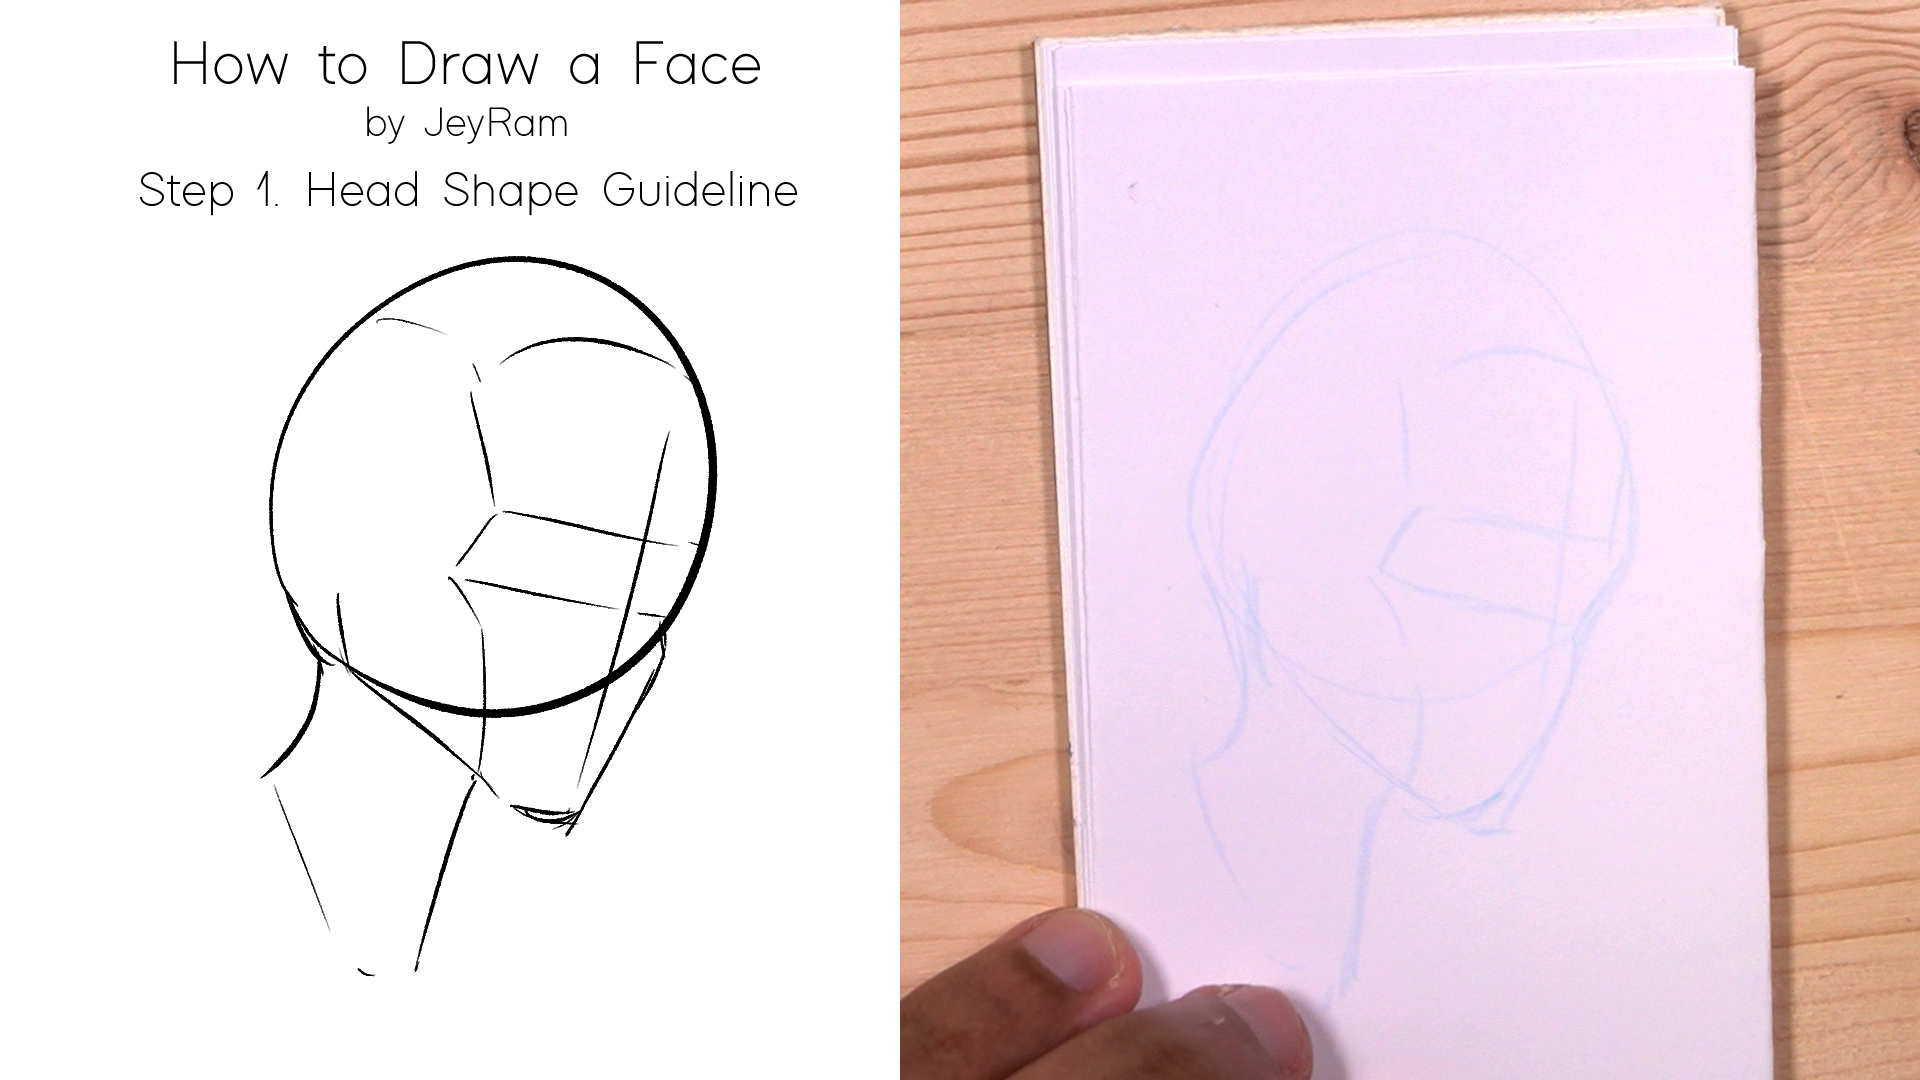 How To Draw A Face In 8 Easy Steps With Pictures Videos Jeyram Art To make it easy to digest, i split the tutorial up into 3 parts: how to draw a face in 8 easy steps